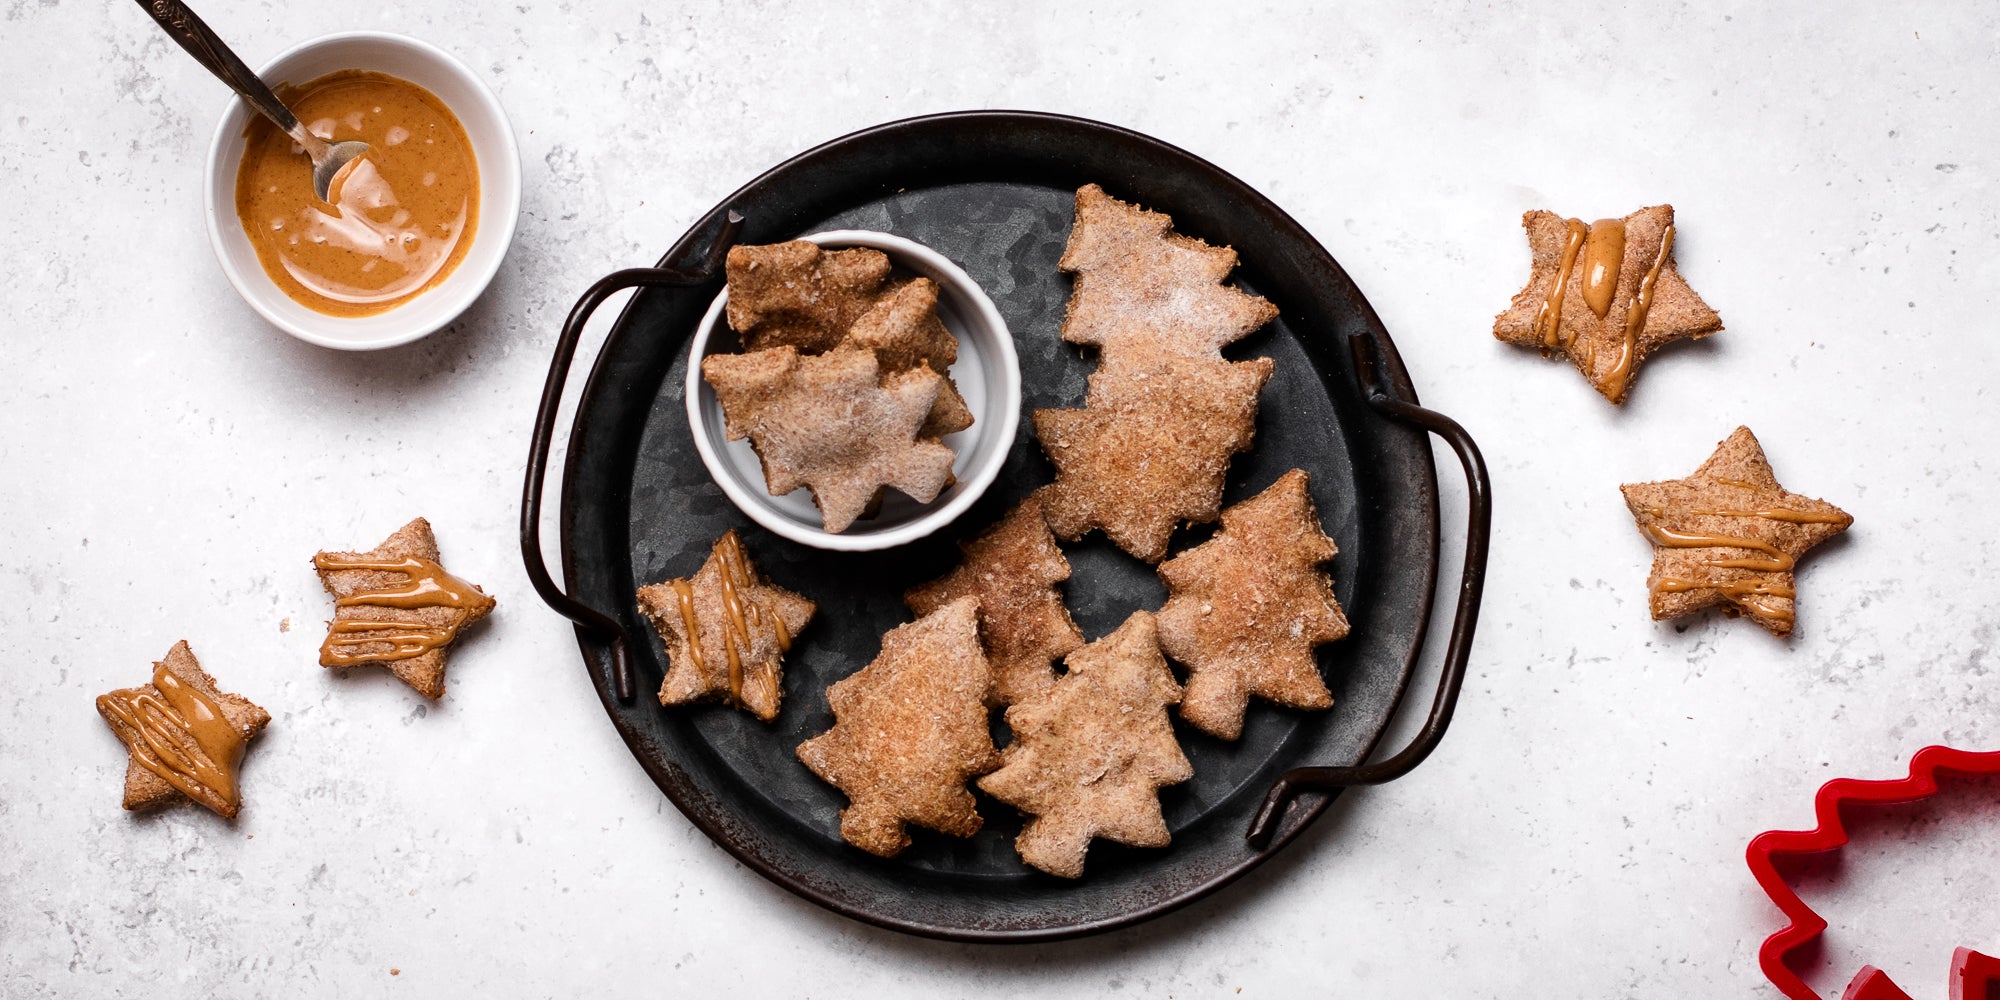 Dog Biscuits cut into festive shapes on a black serving tray next to a bowl of Proper Nutty peanut butter